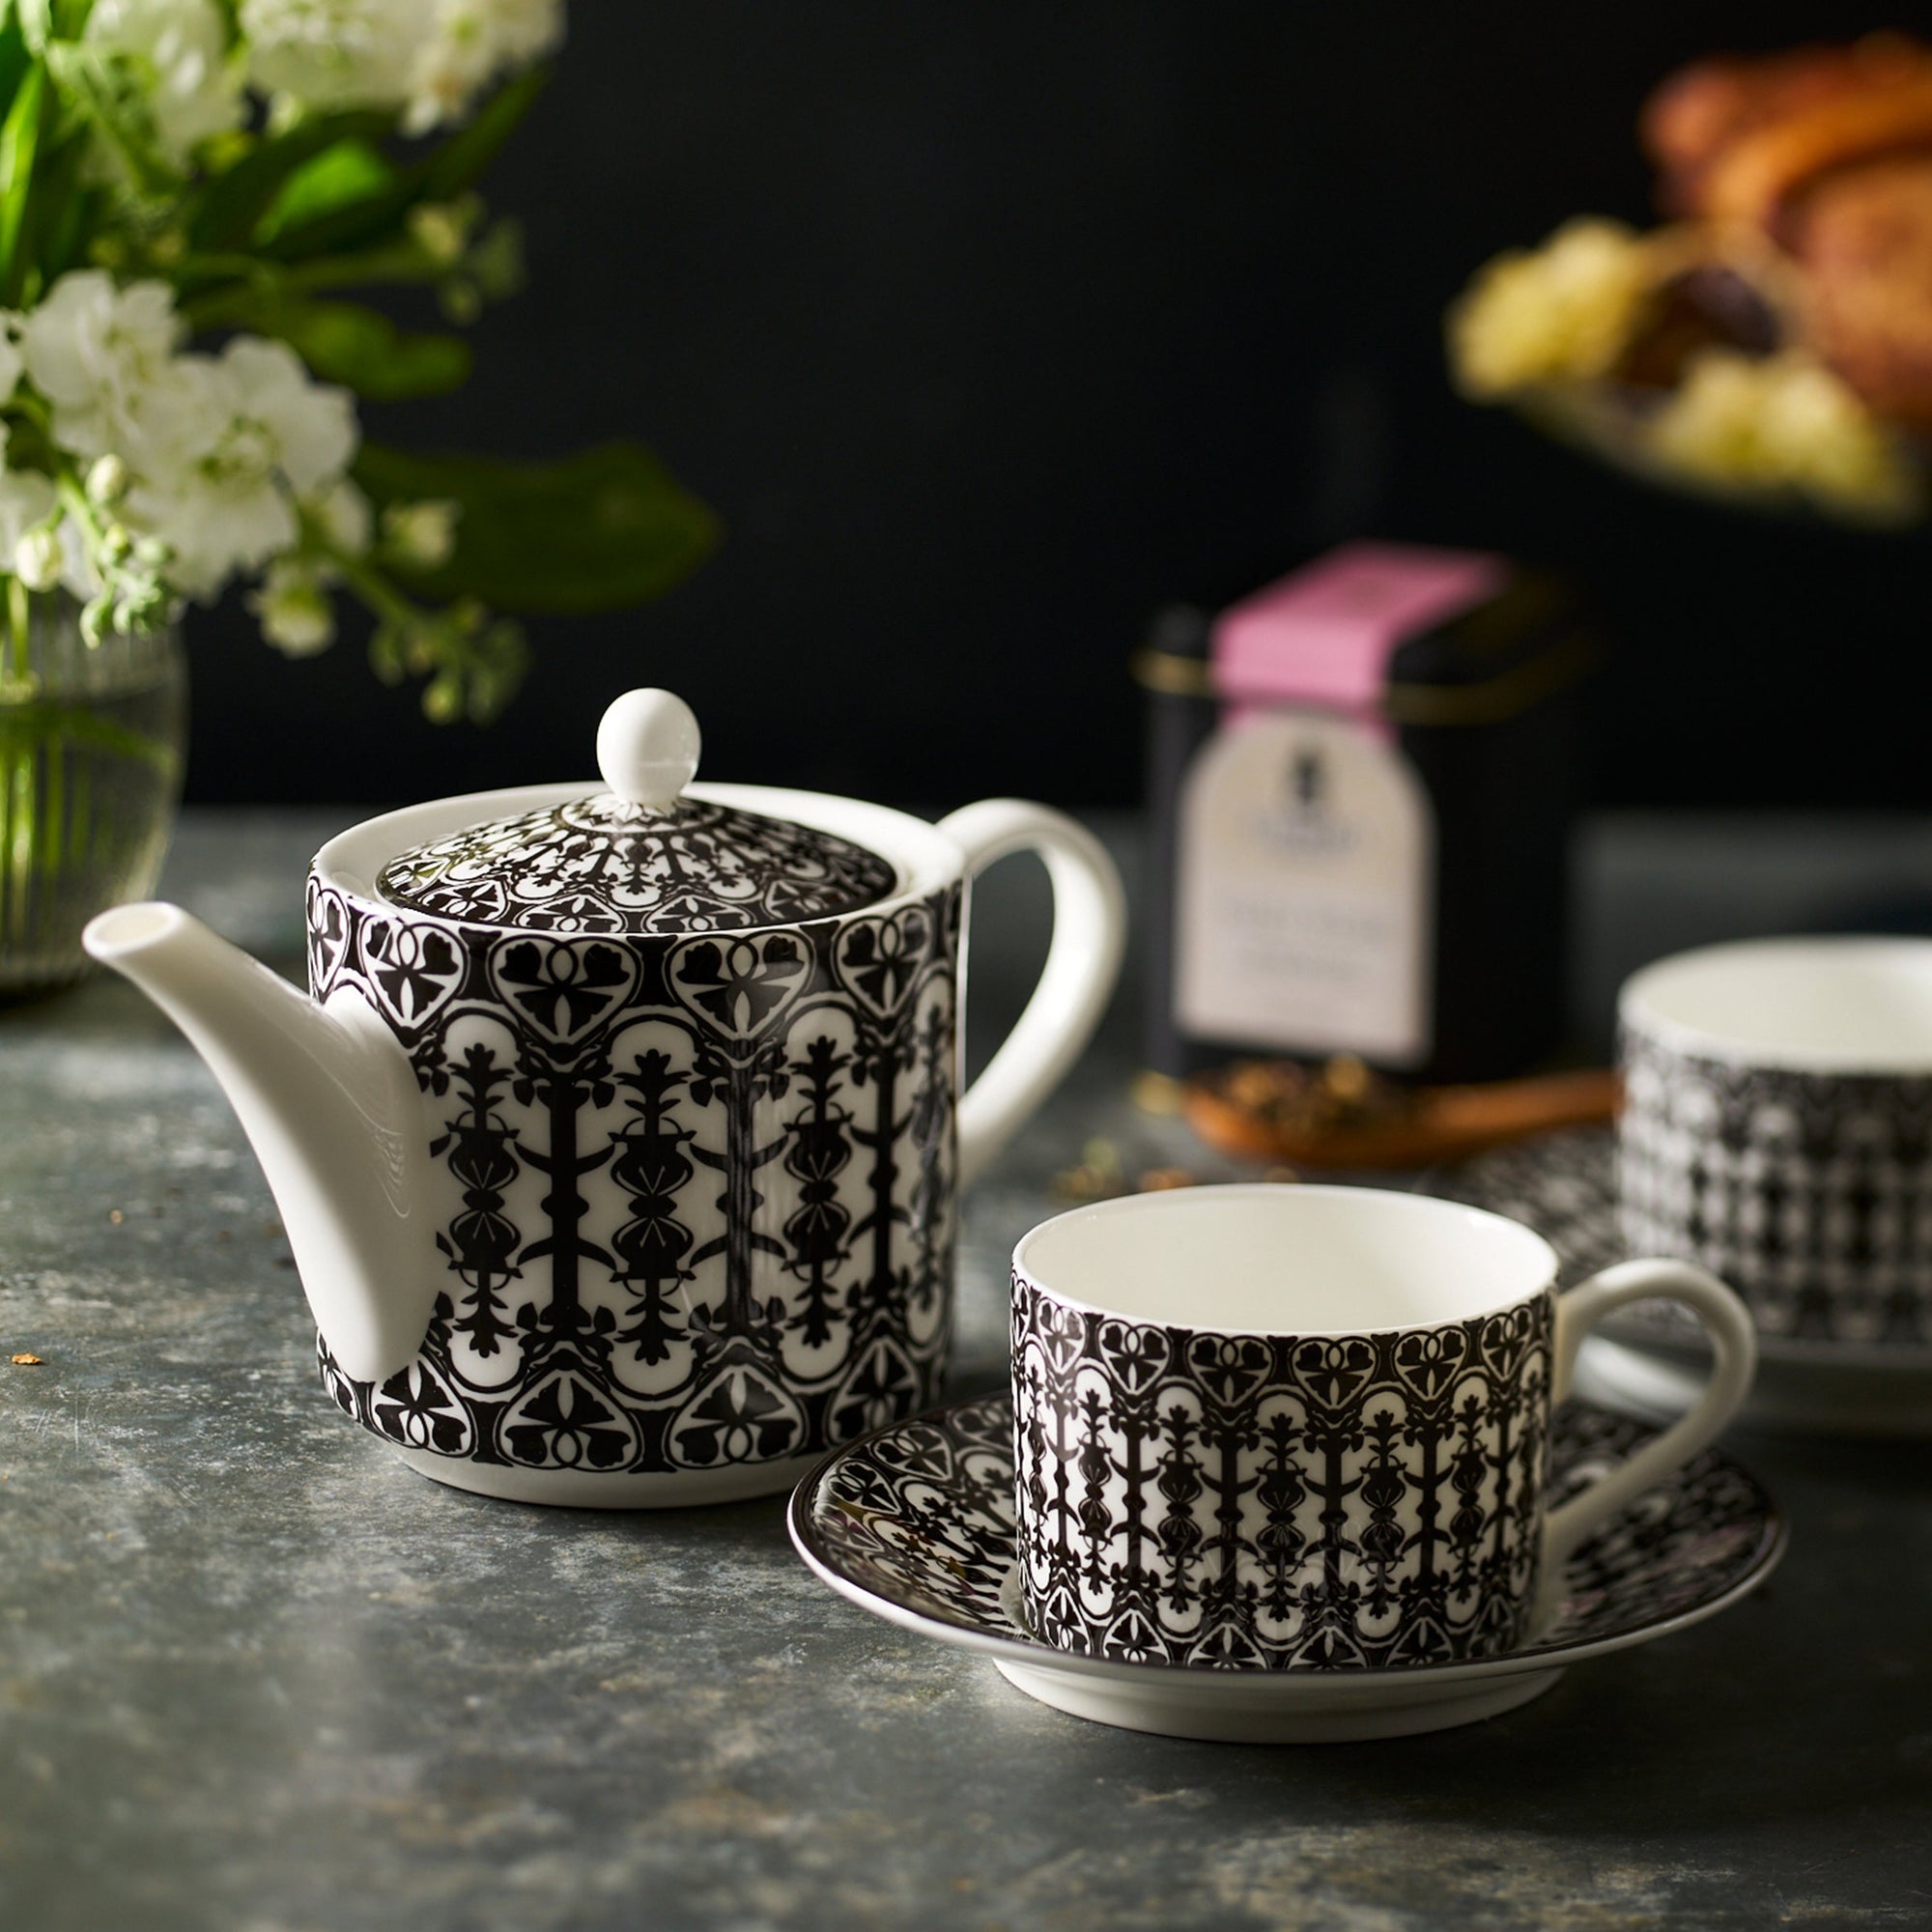 Casablanca black and white bone china teacup and saucer set of 2 from Caskata